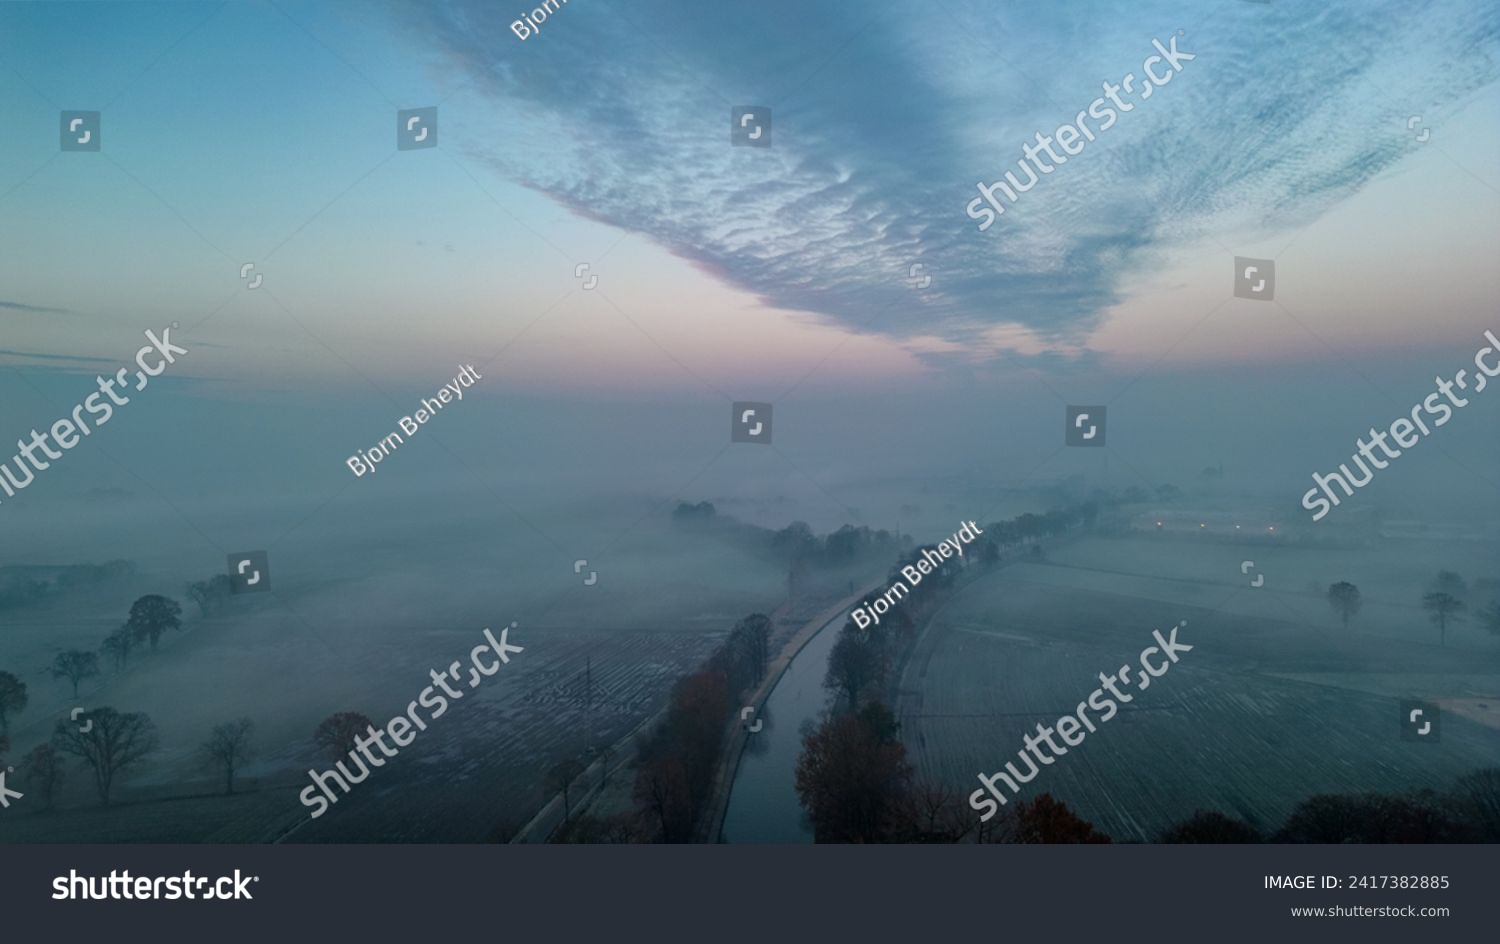 This evocative aerial image captures the tranquil beauty of dawn as it breaks through a layer of mist over a frosty winter landscape. The sky, filled with a dramatic formation of clouds, gradually #2417382885